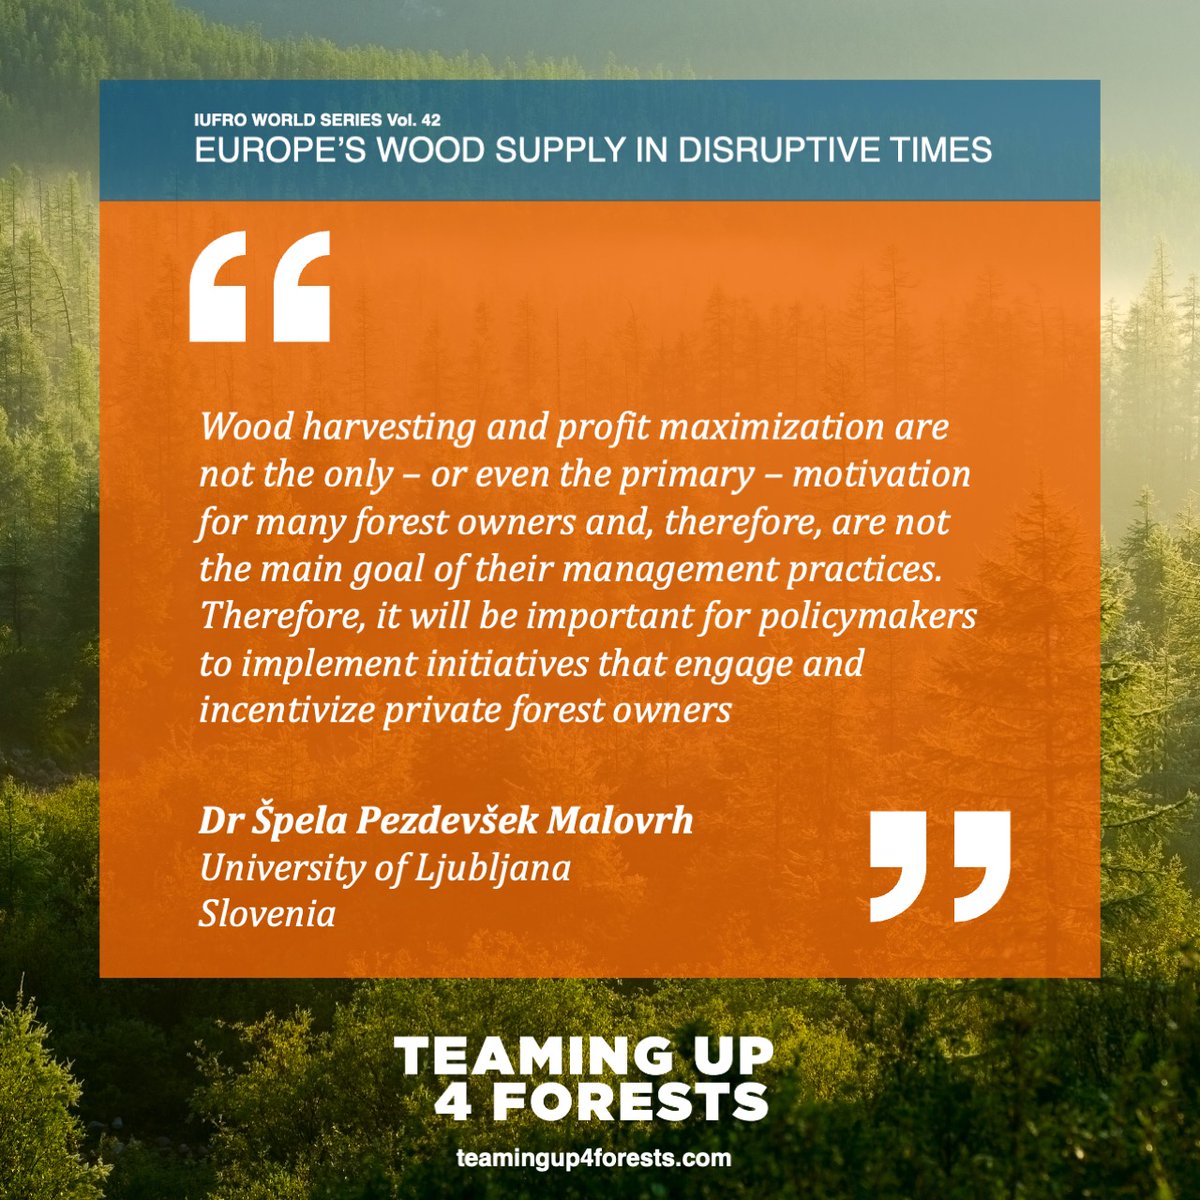 📢Calling all stakeholders in the wood value chain! Don't miss our webinar on 18 March at 13:00 CET, where we'll explore the intersection of science, business, and policy in shaping Europe's wood supply. 🔗 teamingup4forests.com/webinar-europe… #ForestScience #ForestResearch #IntlForestDay